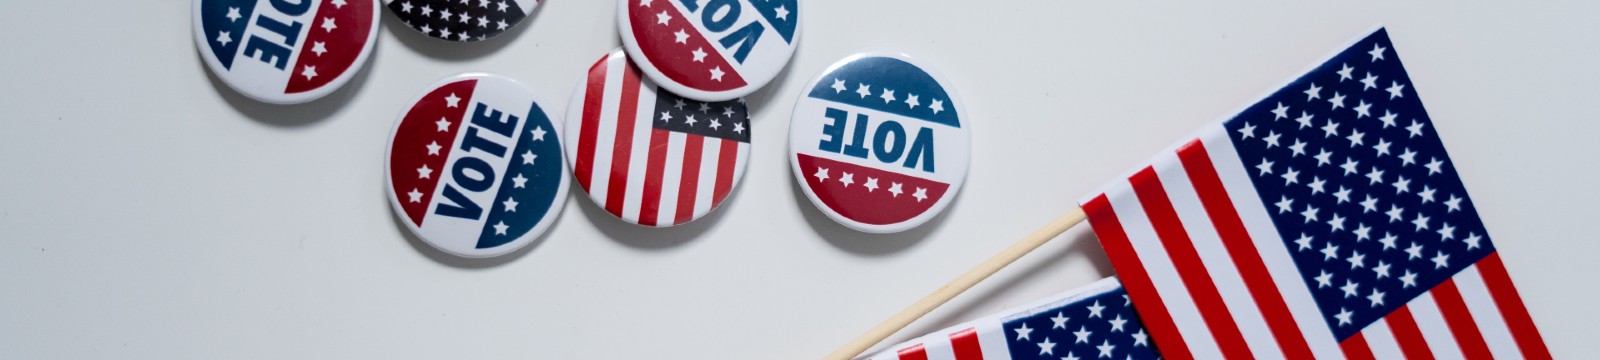 Stock image of American flag and vote buttons